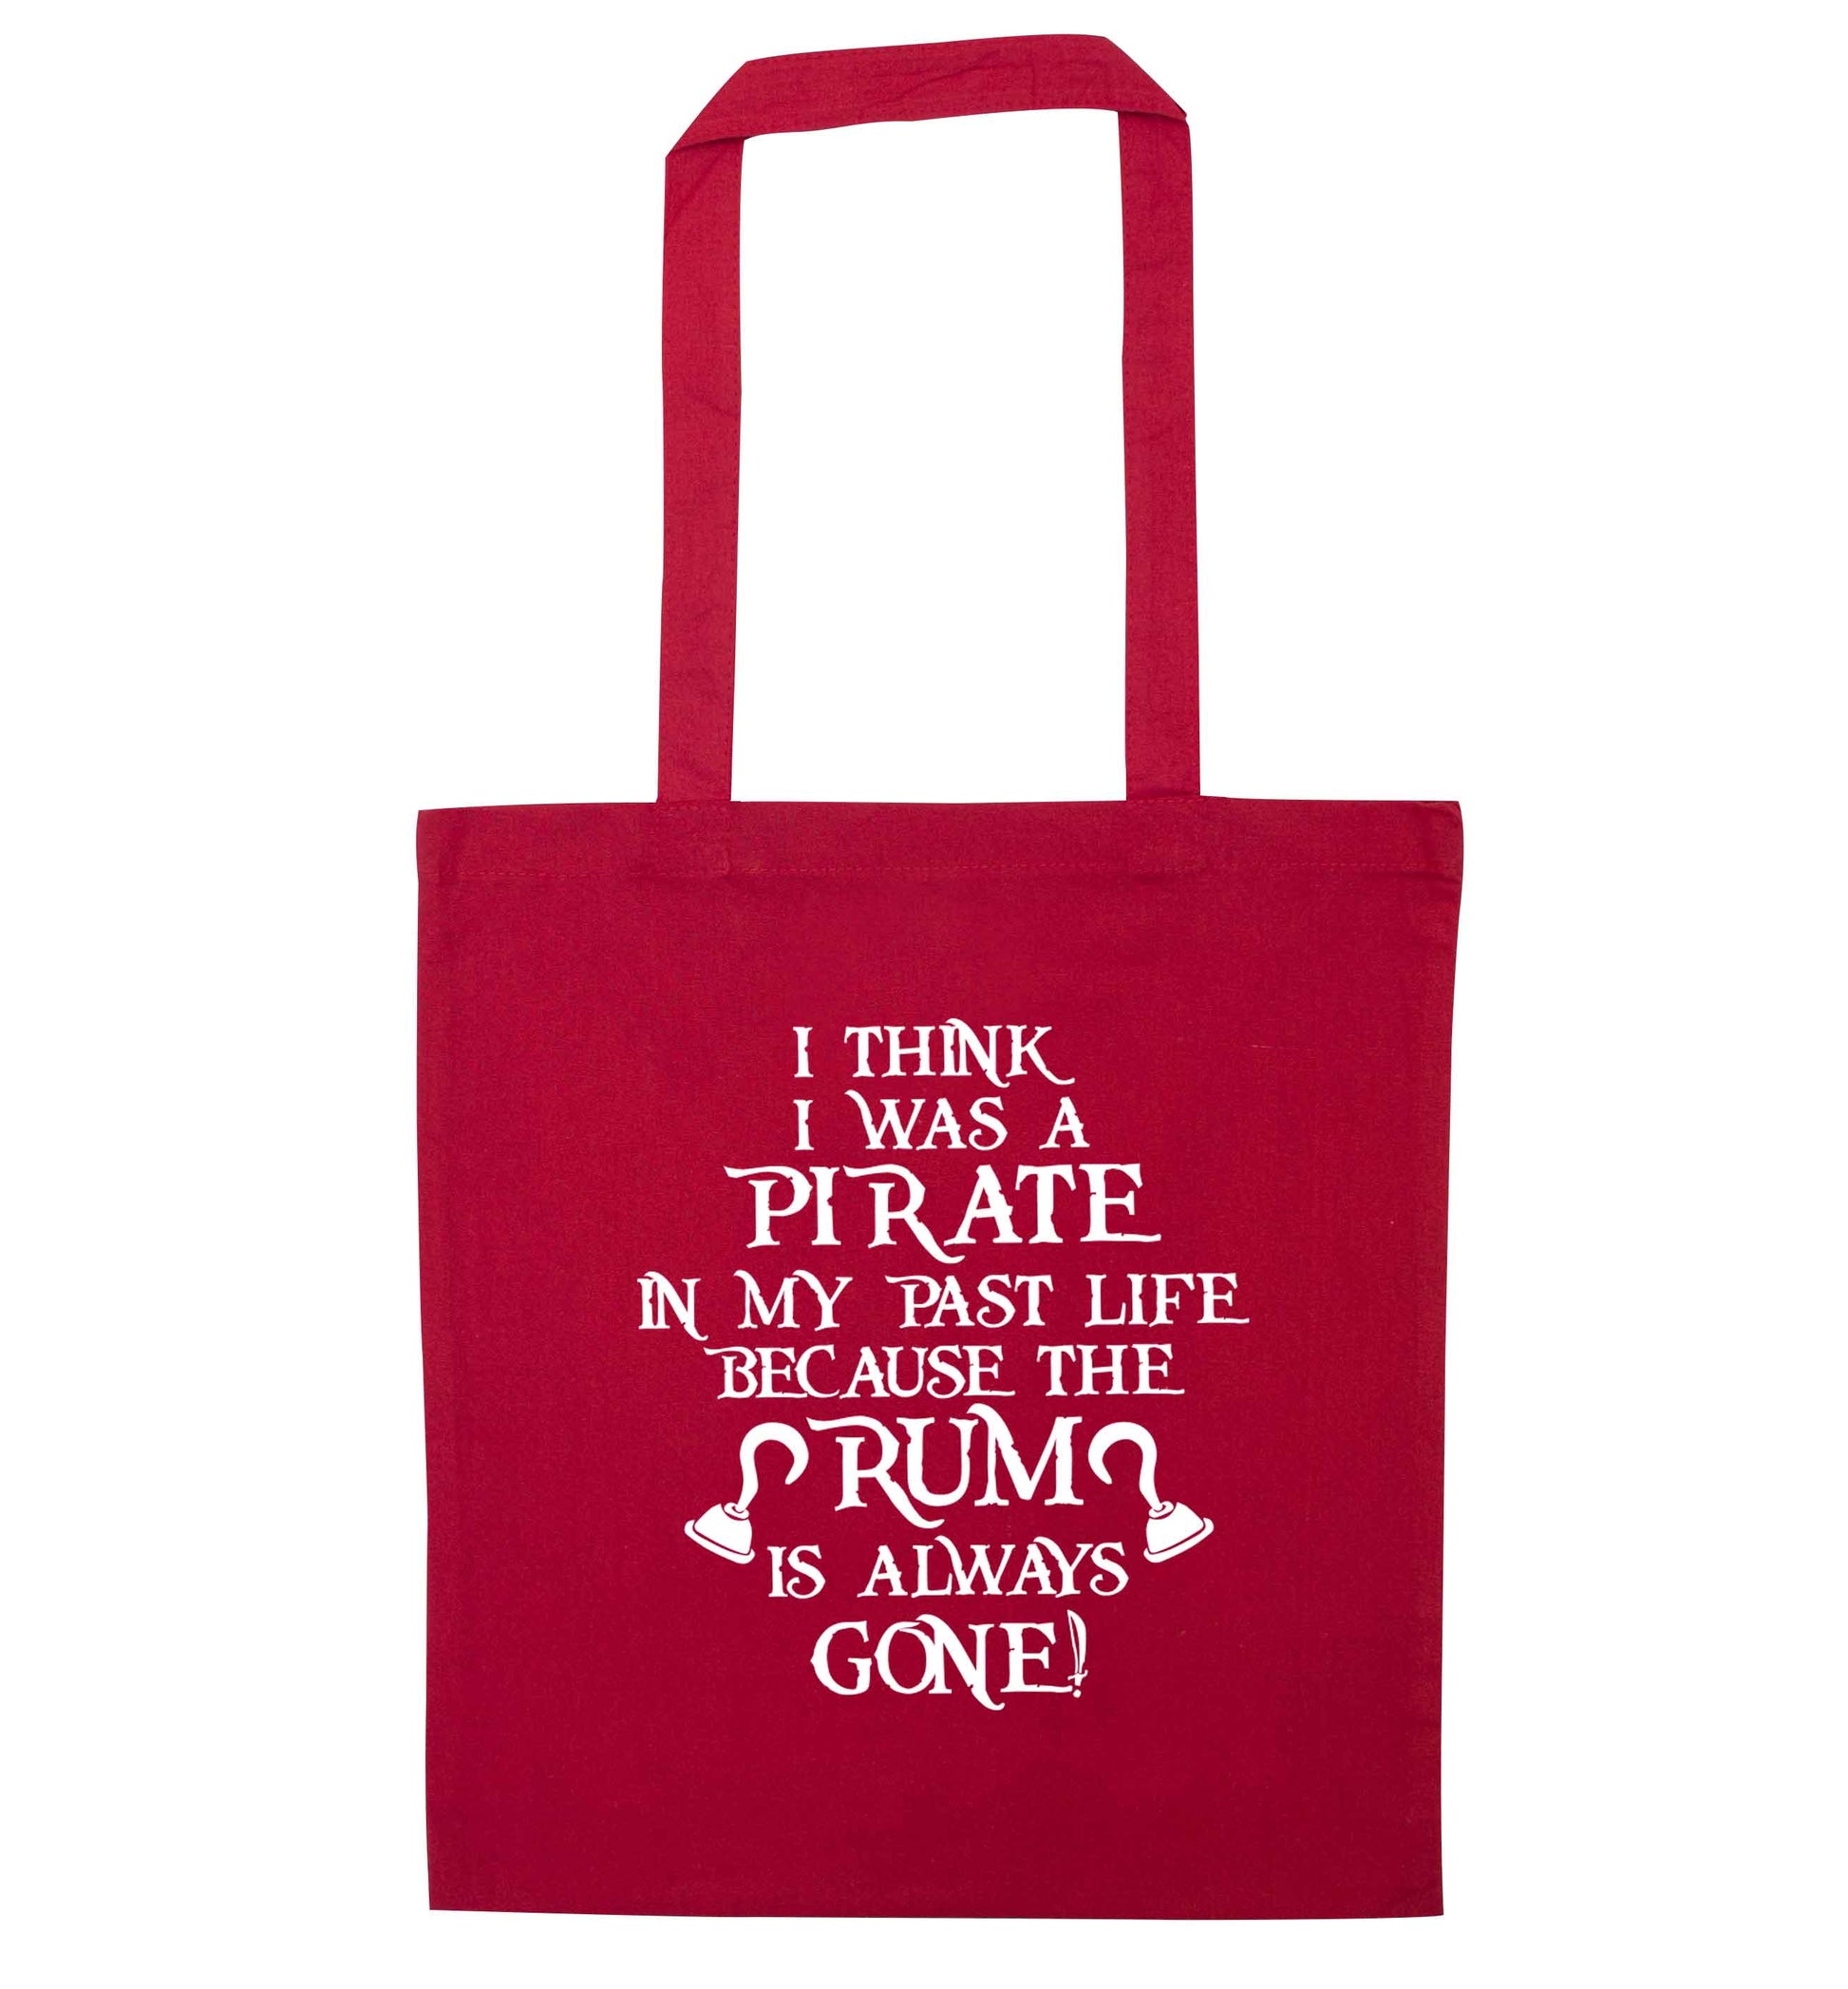 I think I was a pirate in my past life the rum is always gone red tote bag